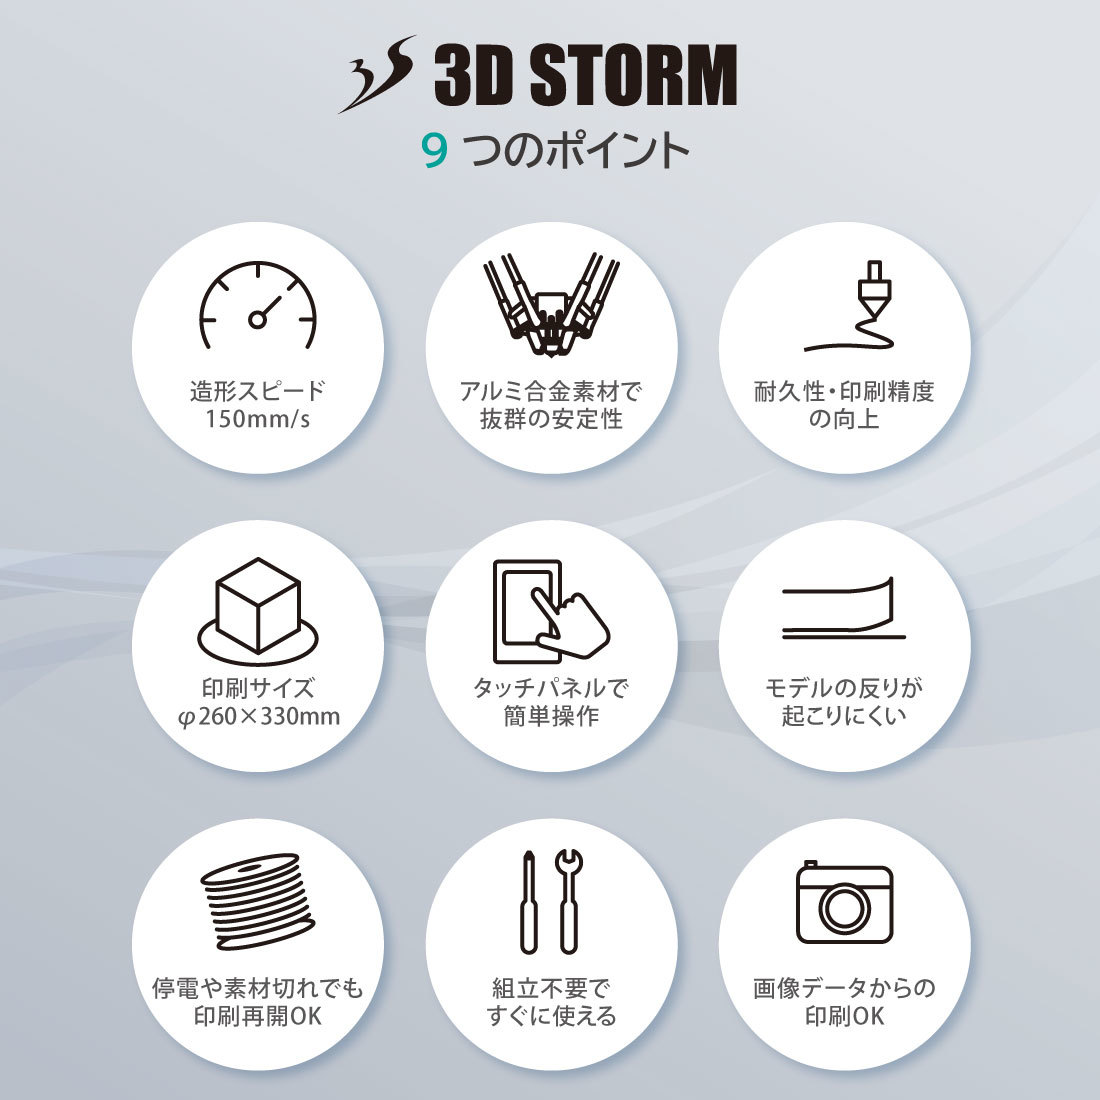 3D printer small size auto level ring function installing operation simple construction ending PLA filament material 3D STORM PLA TPU PETG WOOD ABS Japanese instructions attaching 